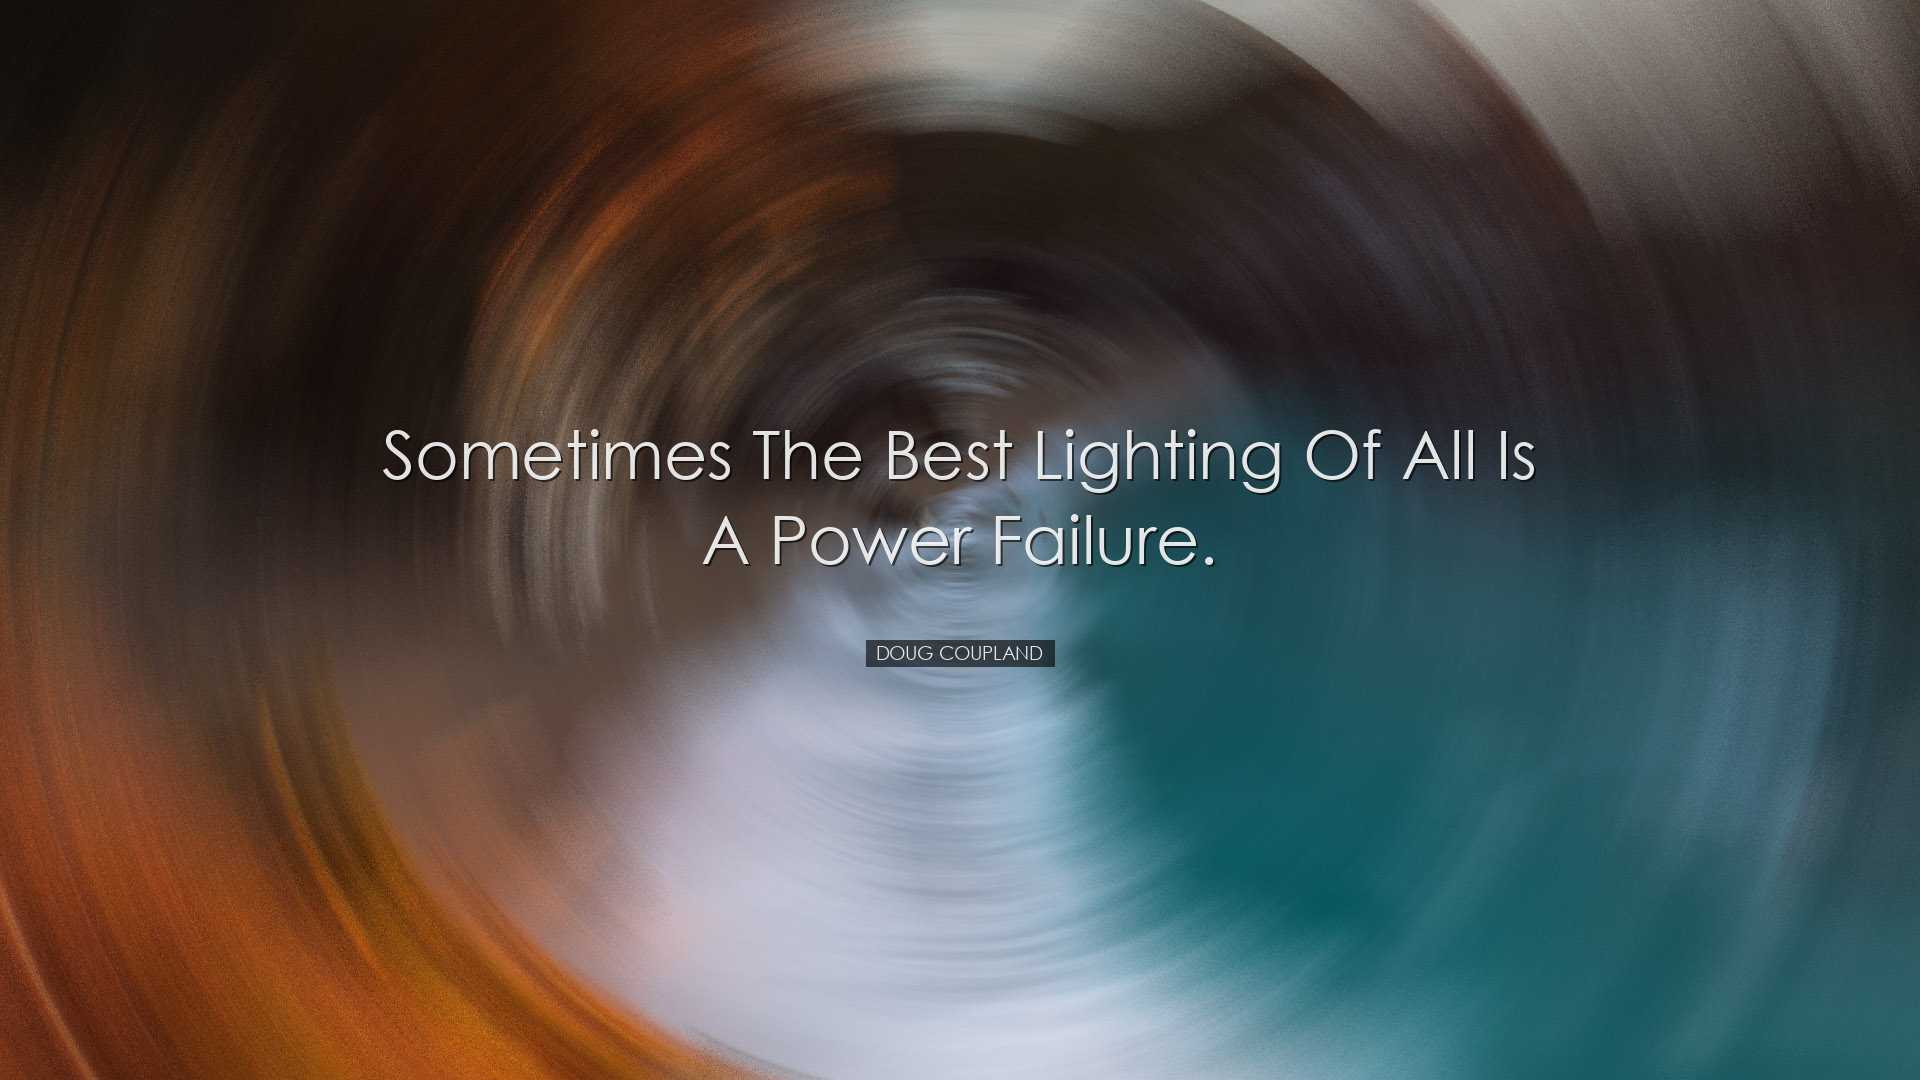 Sometimes the best lighting of all is a power failure. - Doug Coup